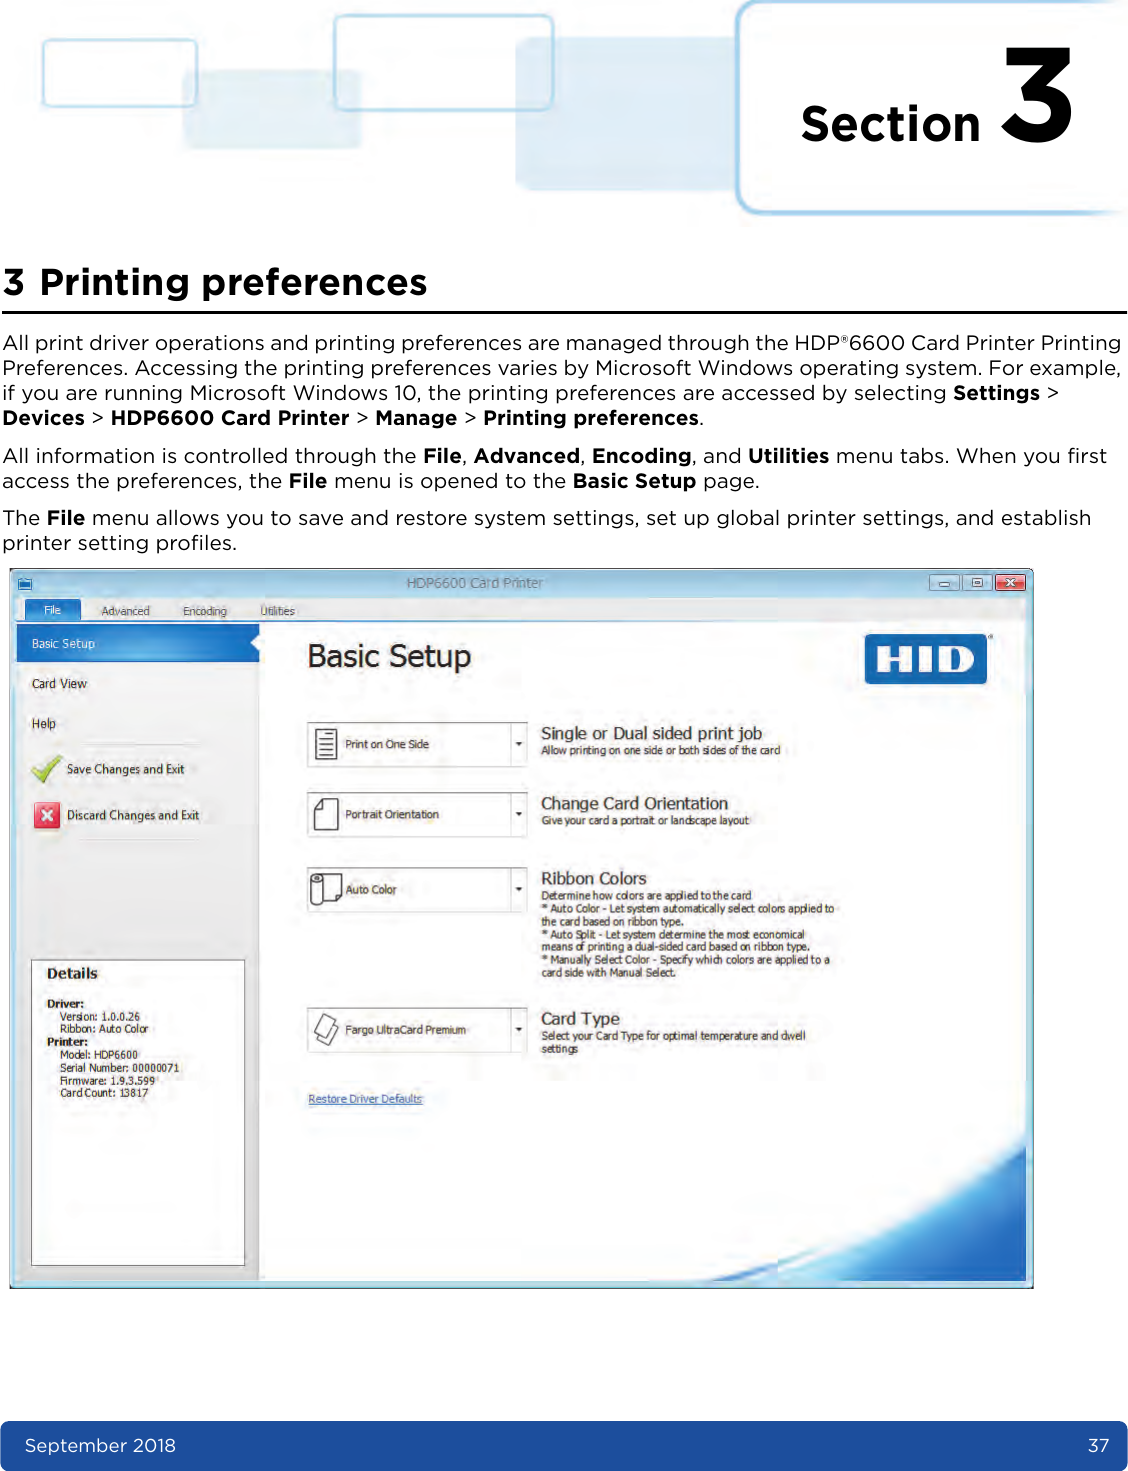 Section 3September 2018 373 Printing preferencesAll print driver operations and printing preferences are managed through the HDP®6600 Card Printer Printing Preferences. Accessing the printing preferences varies by Microsoft Windows operating system. For example, if you are running Microsoft Windows 10, the printing preferences are accessed by selecting Settings &gt; Devices &gt; HDP6600 Card Printer &gt; Manage &gt; Printing preferences.All information is controlled through the File, Advanced, Encoding, and Utilities menu tabs. When you first access the preferences, the File menu is opened to the Basic Setup page. The File menu allows you to save and restore system settings, set up global printer settings, and establish printer setting profiles. 